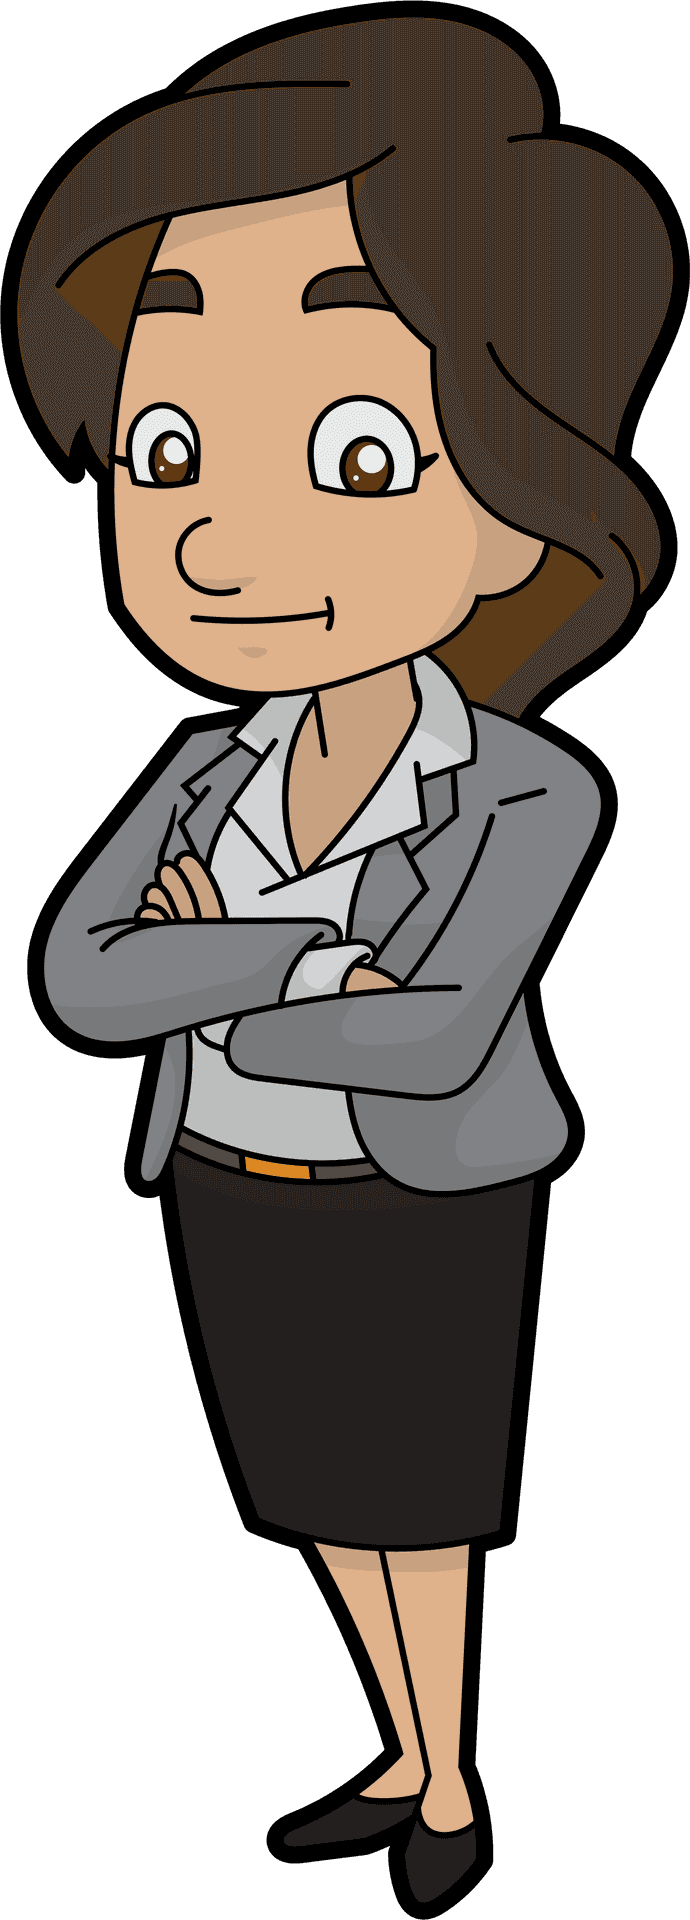 [100+] Business Woman Png Images | Wallpapers.com